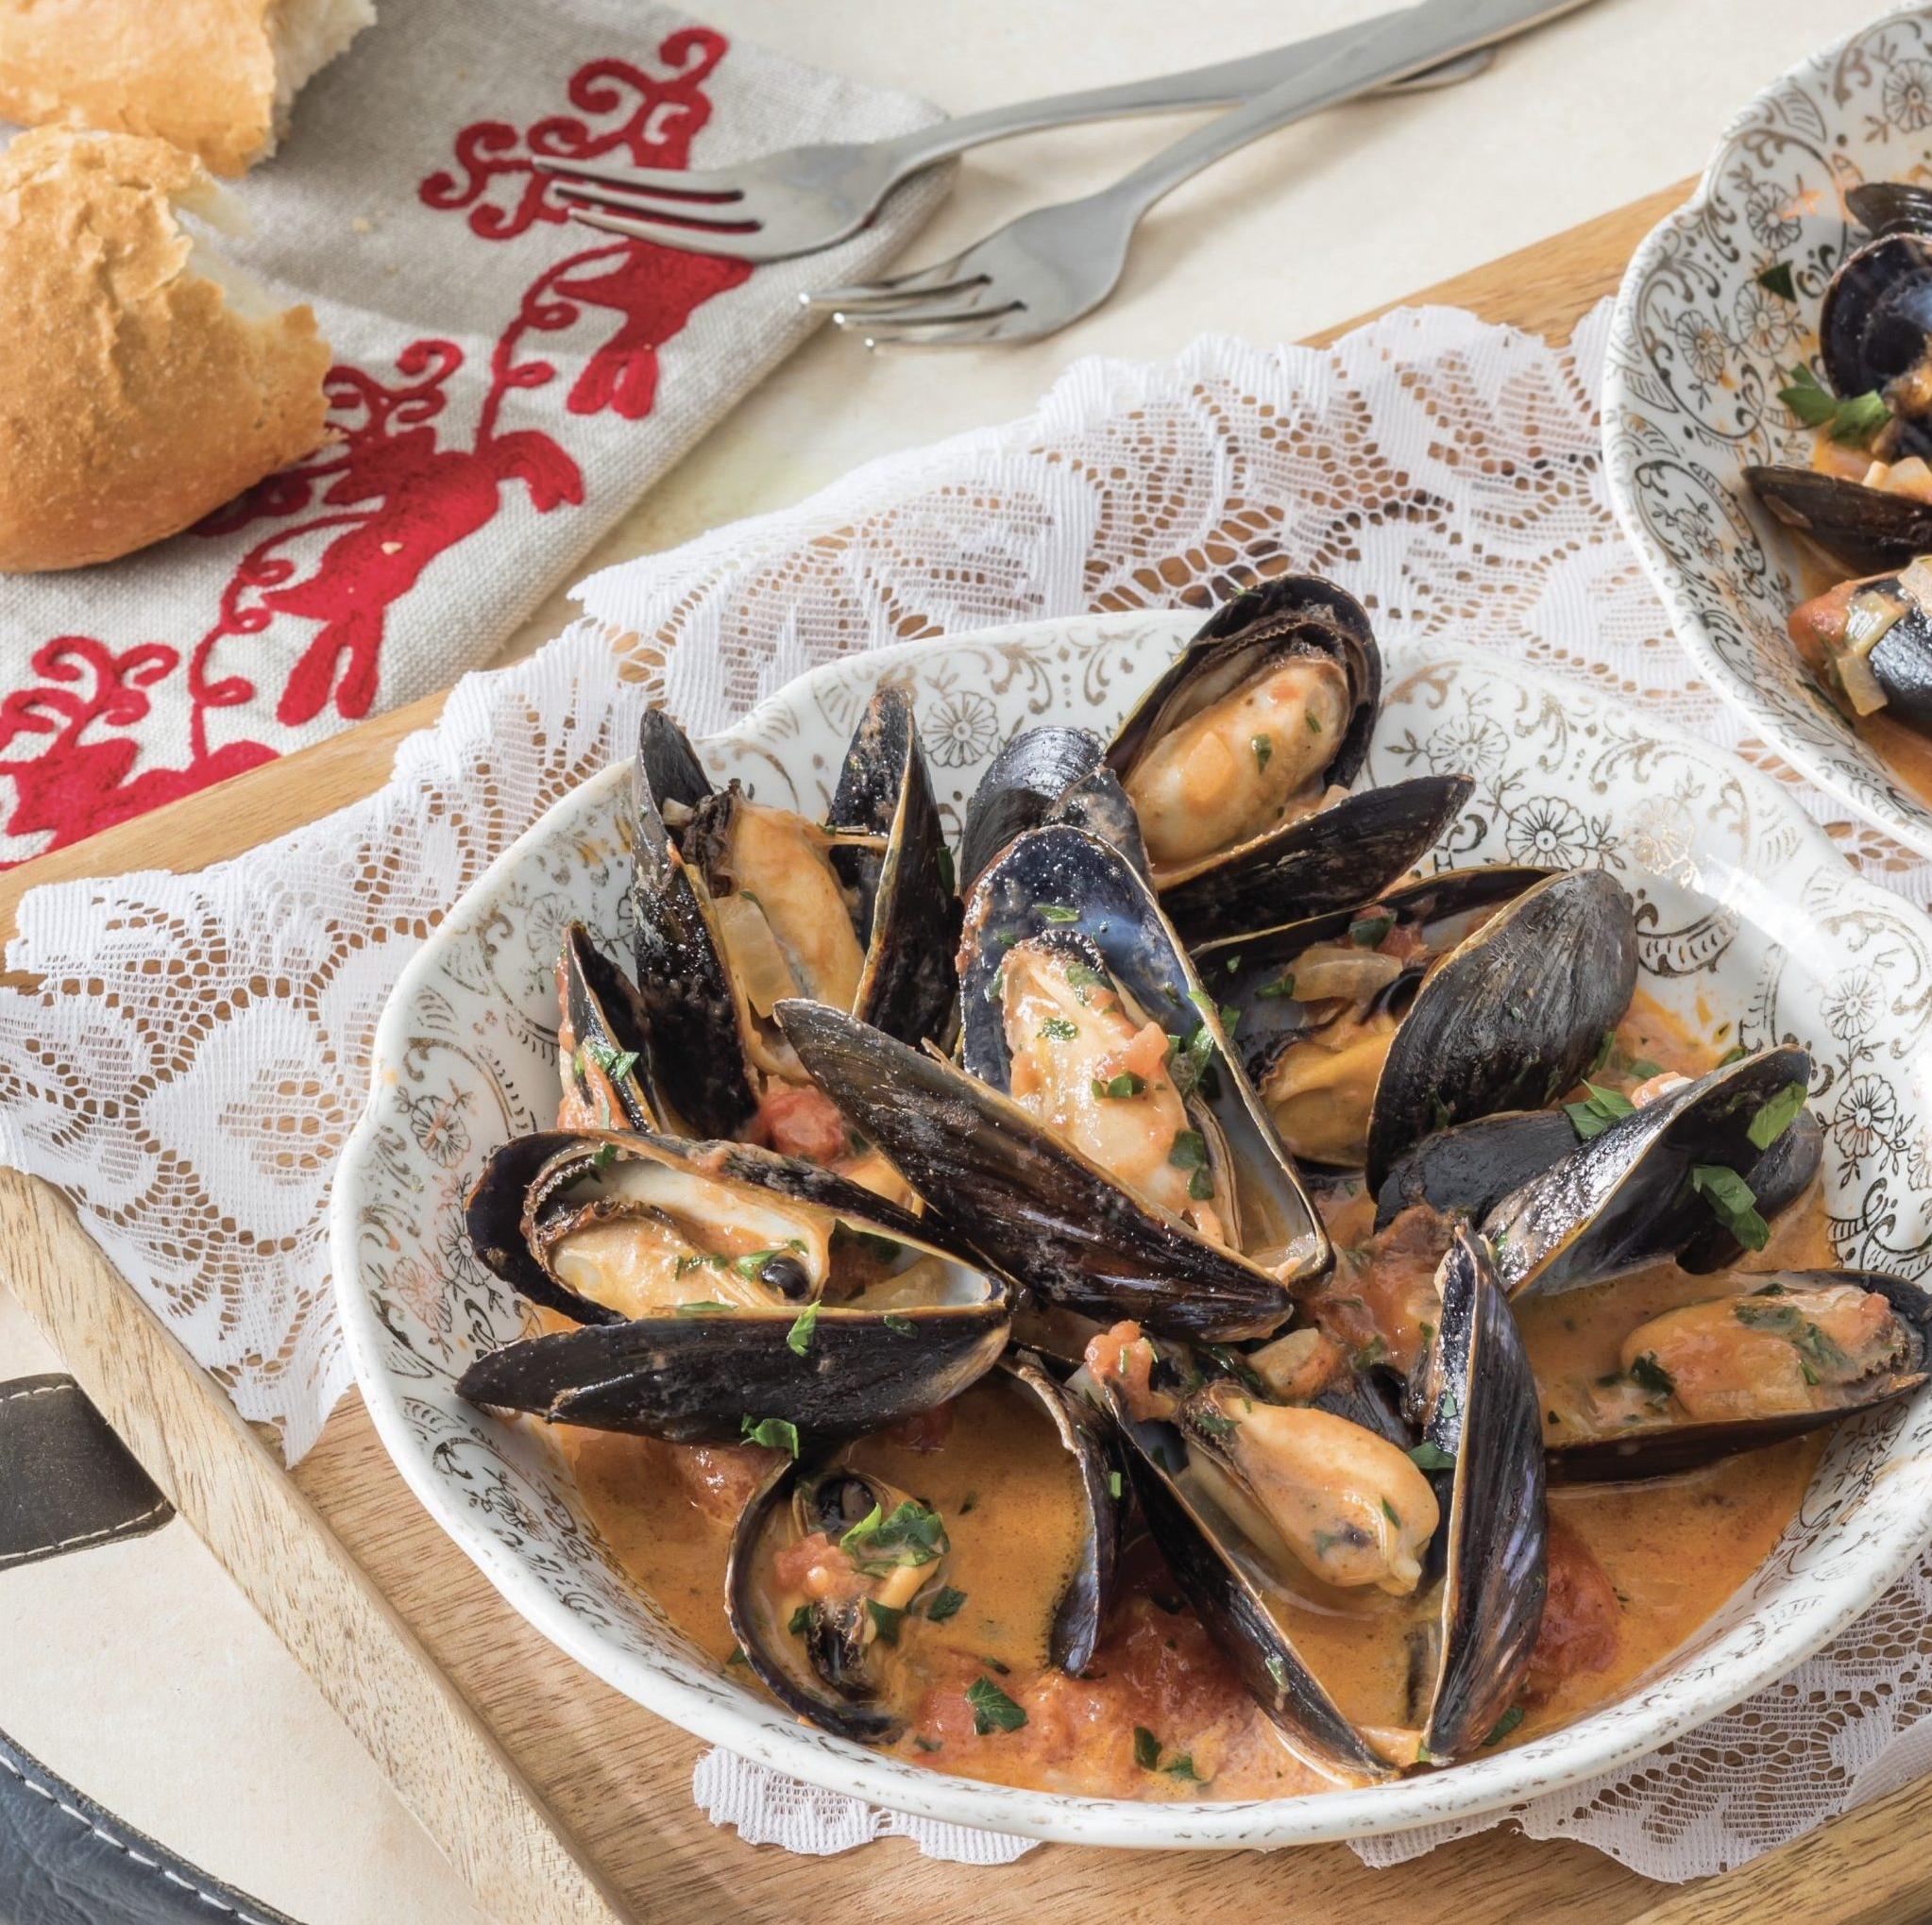  Every bite of these succulent mussels will take you closer to heaven.